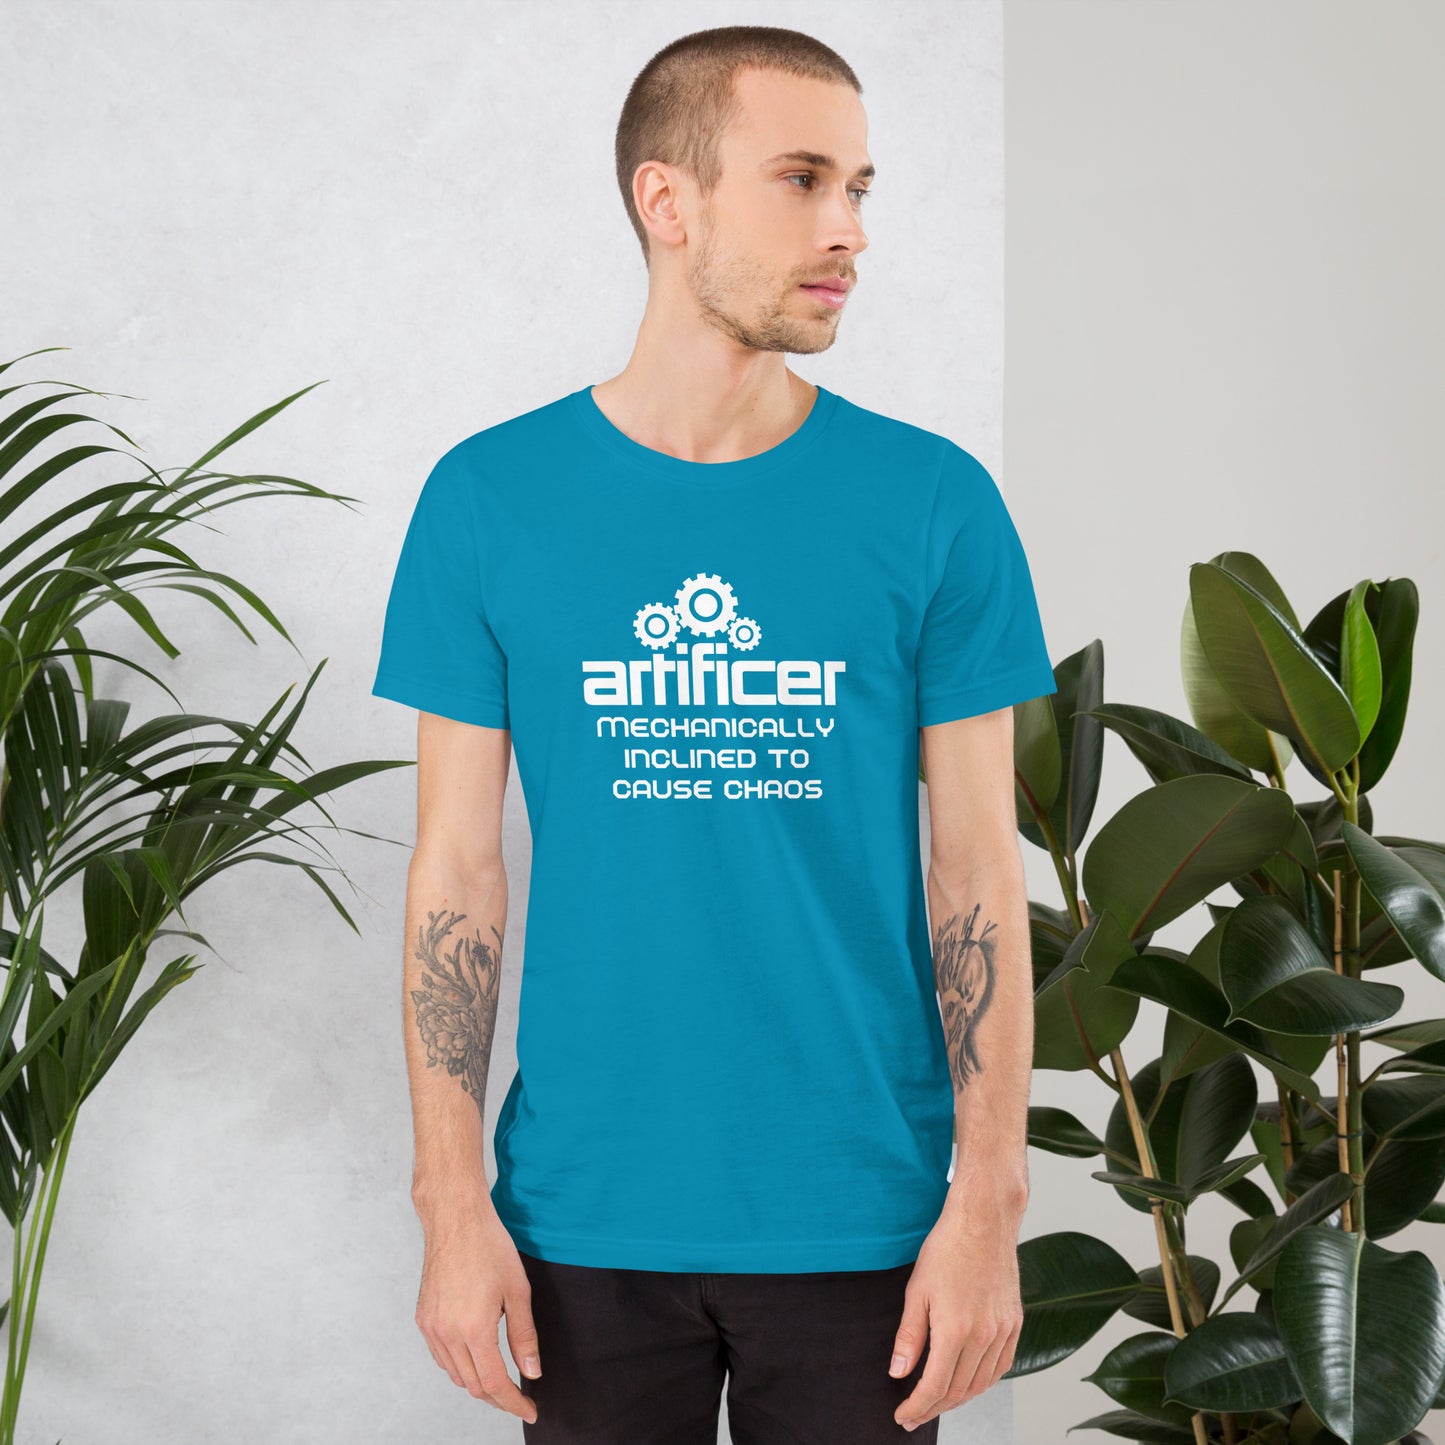 Mechanically inclined to cause chaos - Artificer D&D Unisex t-shirt